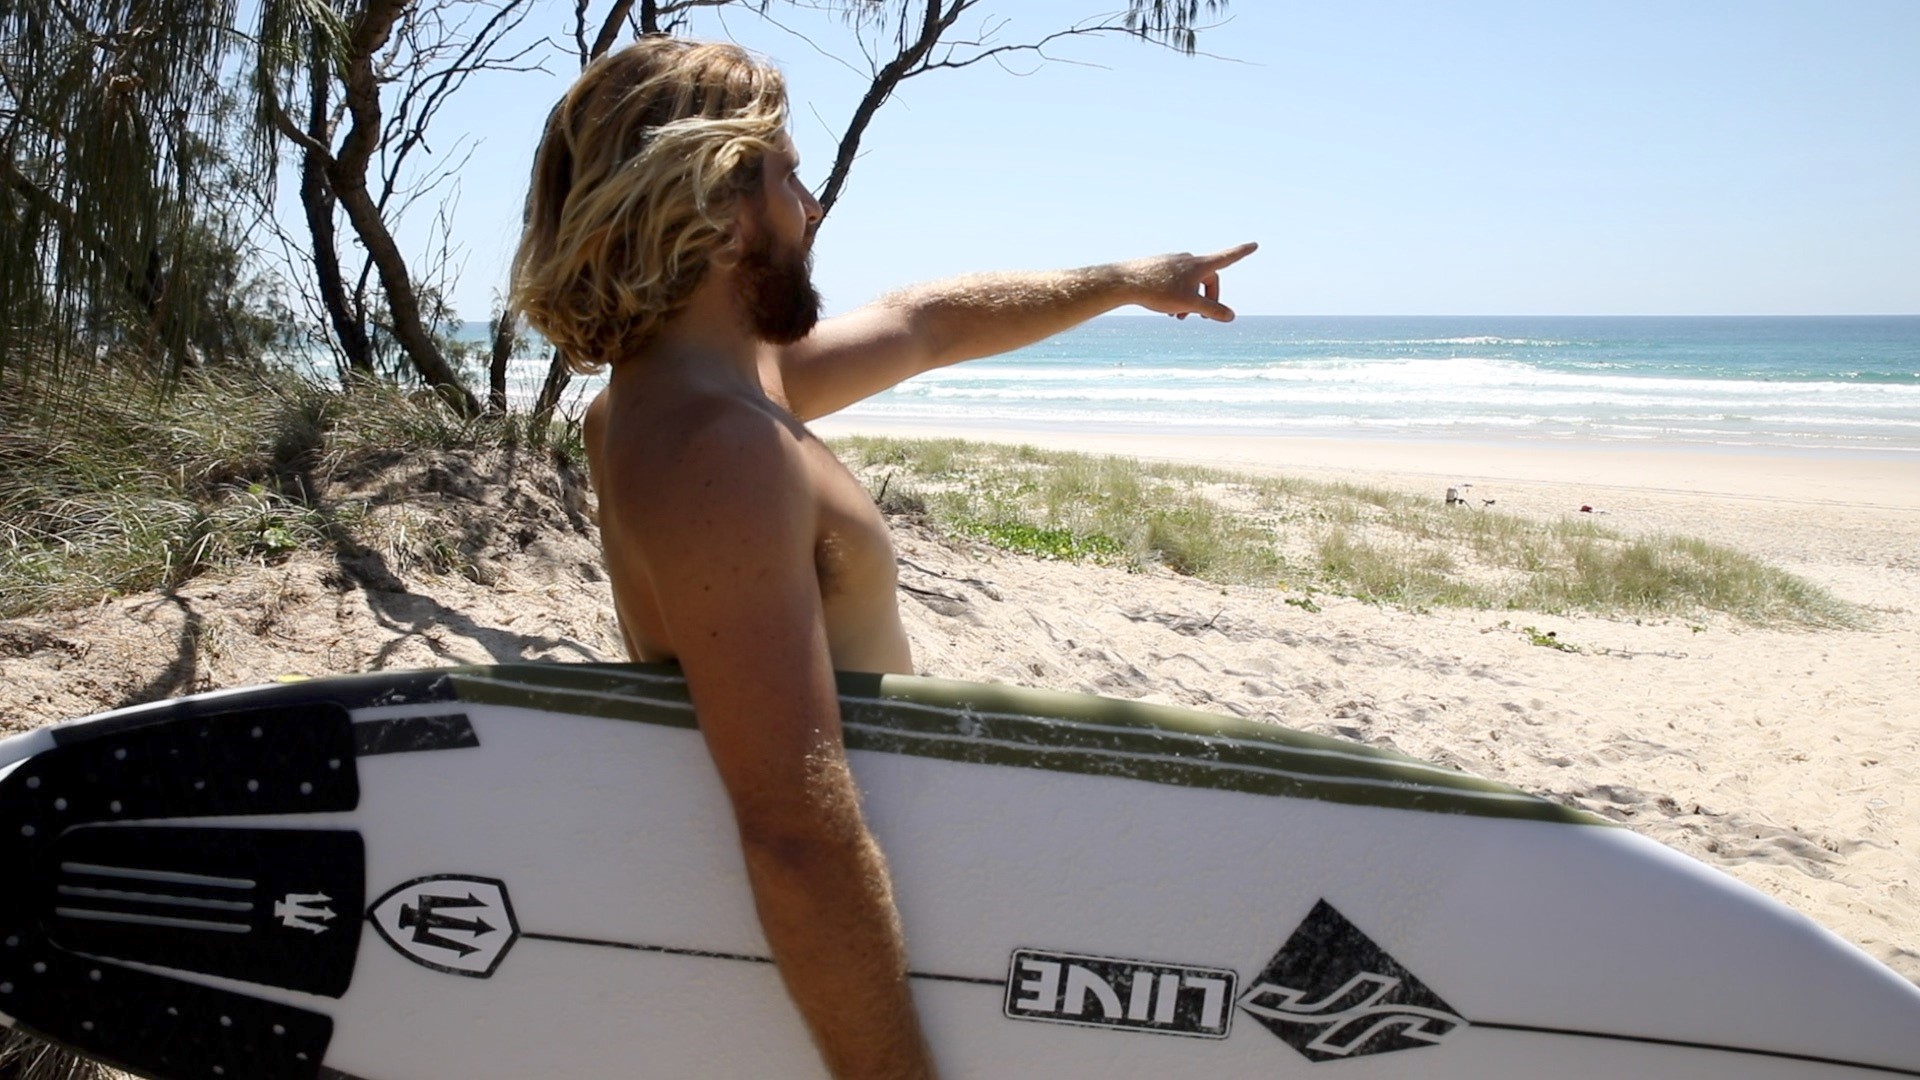 HOW TO WAX A SURFBOARD WITH WADE CARMICHAEL